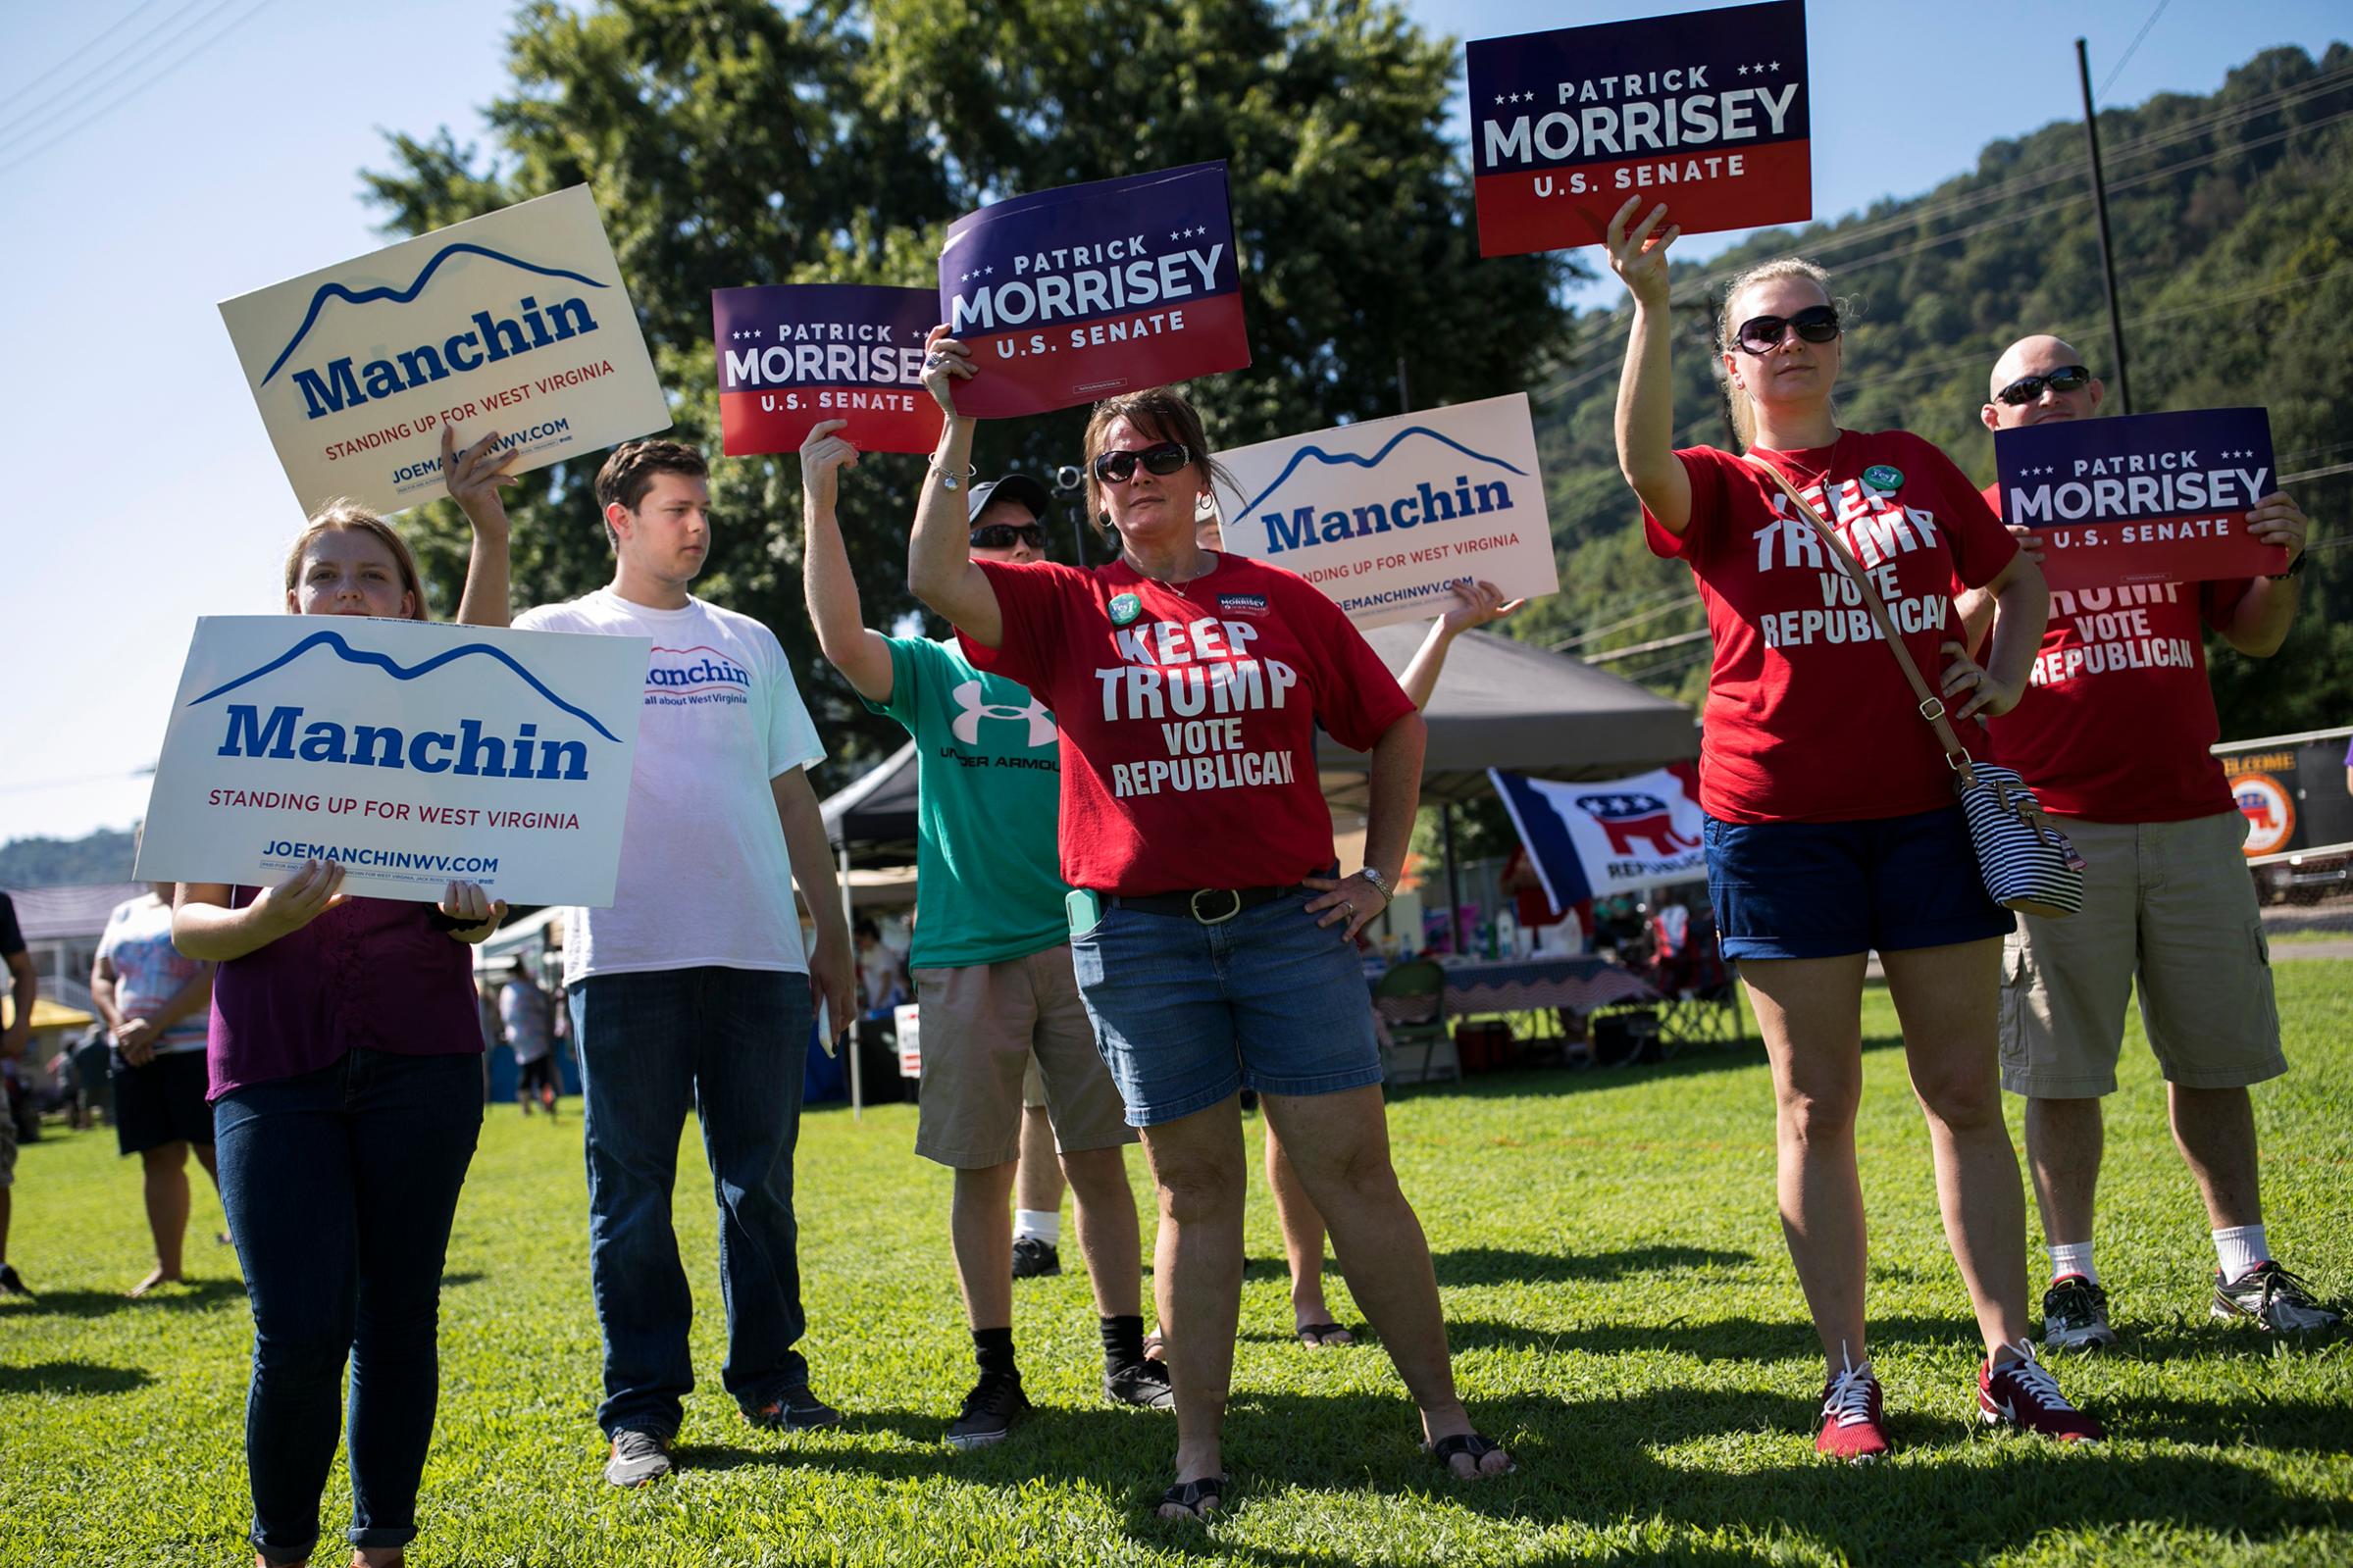 Demonstrators campaign on Sept. 3 in Marmet, W.Va., in a Senate race that has centered on health care